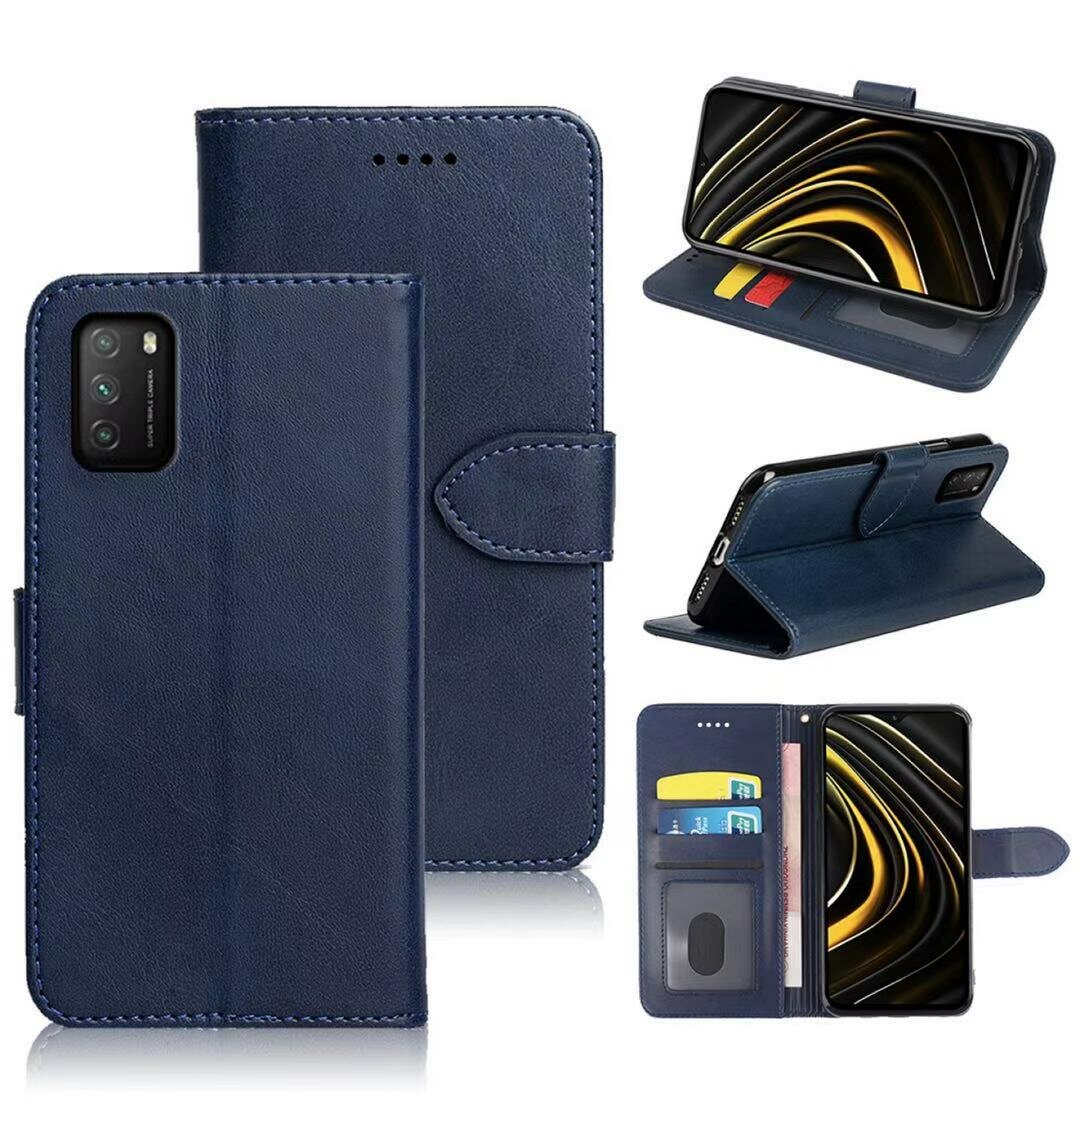 Bakeey for POCO M3 Case Magnetic Flip with Multi Card Slots Wallet Stand PU Leather Full Body Cover 